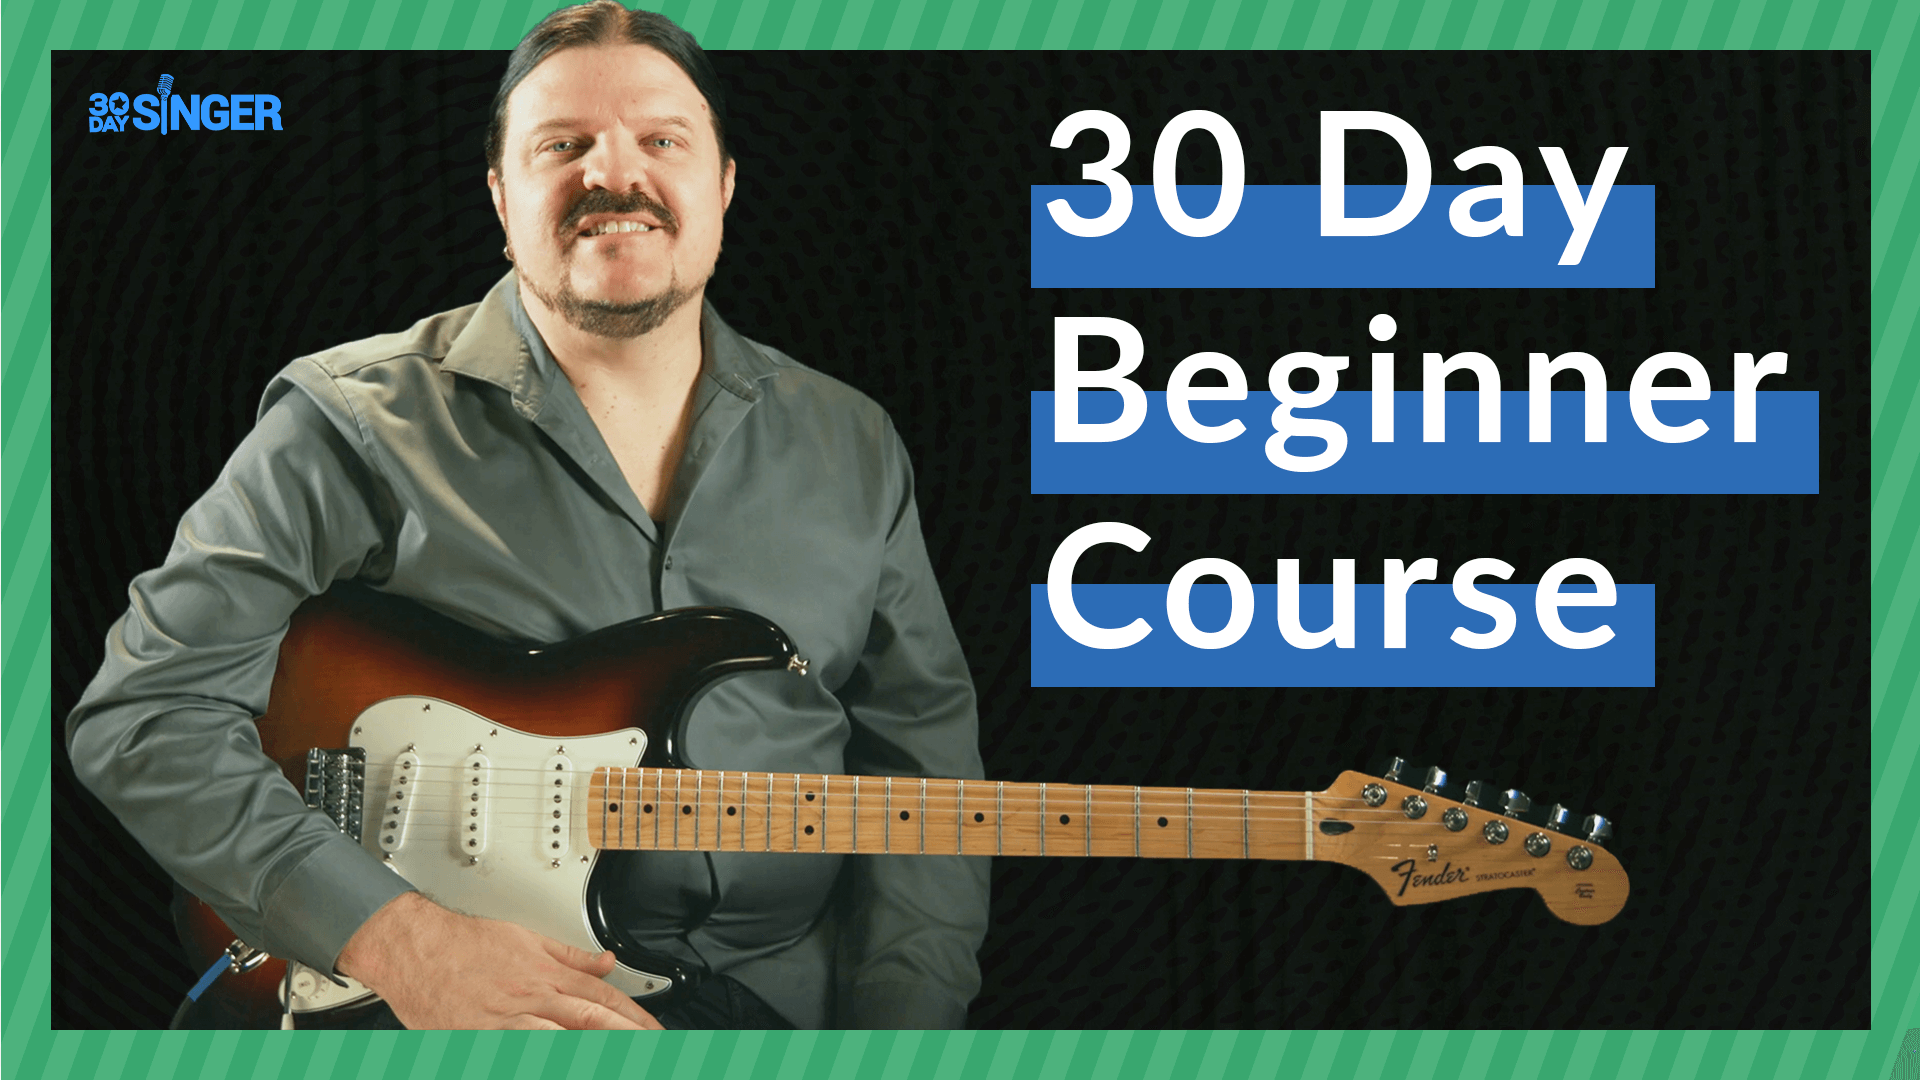 30 Day Singer Course for Beginners with Jon Statham